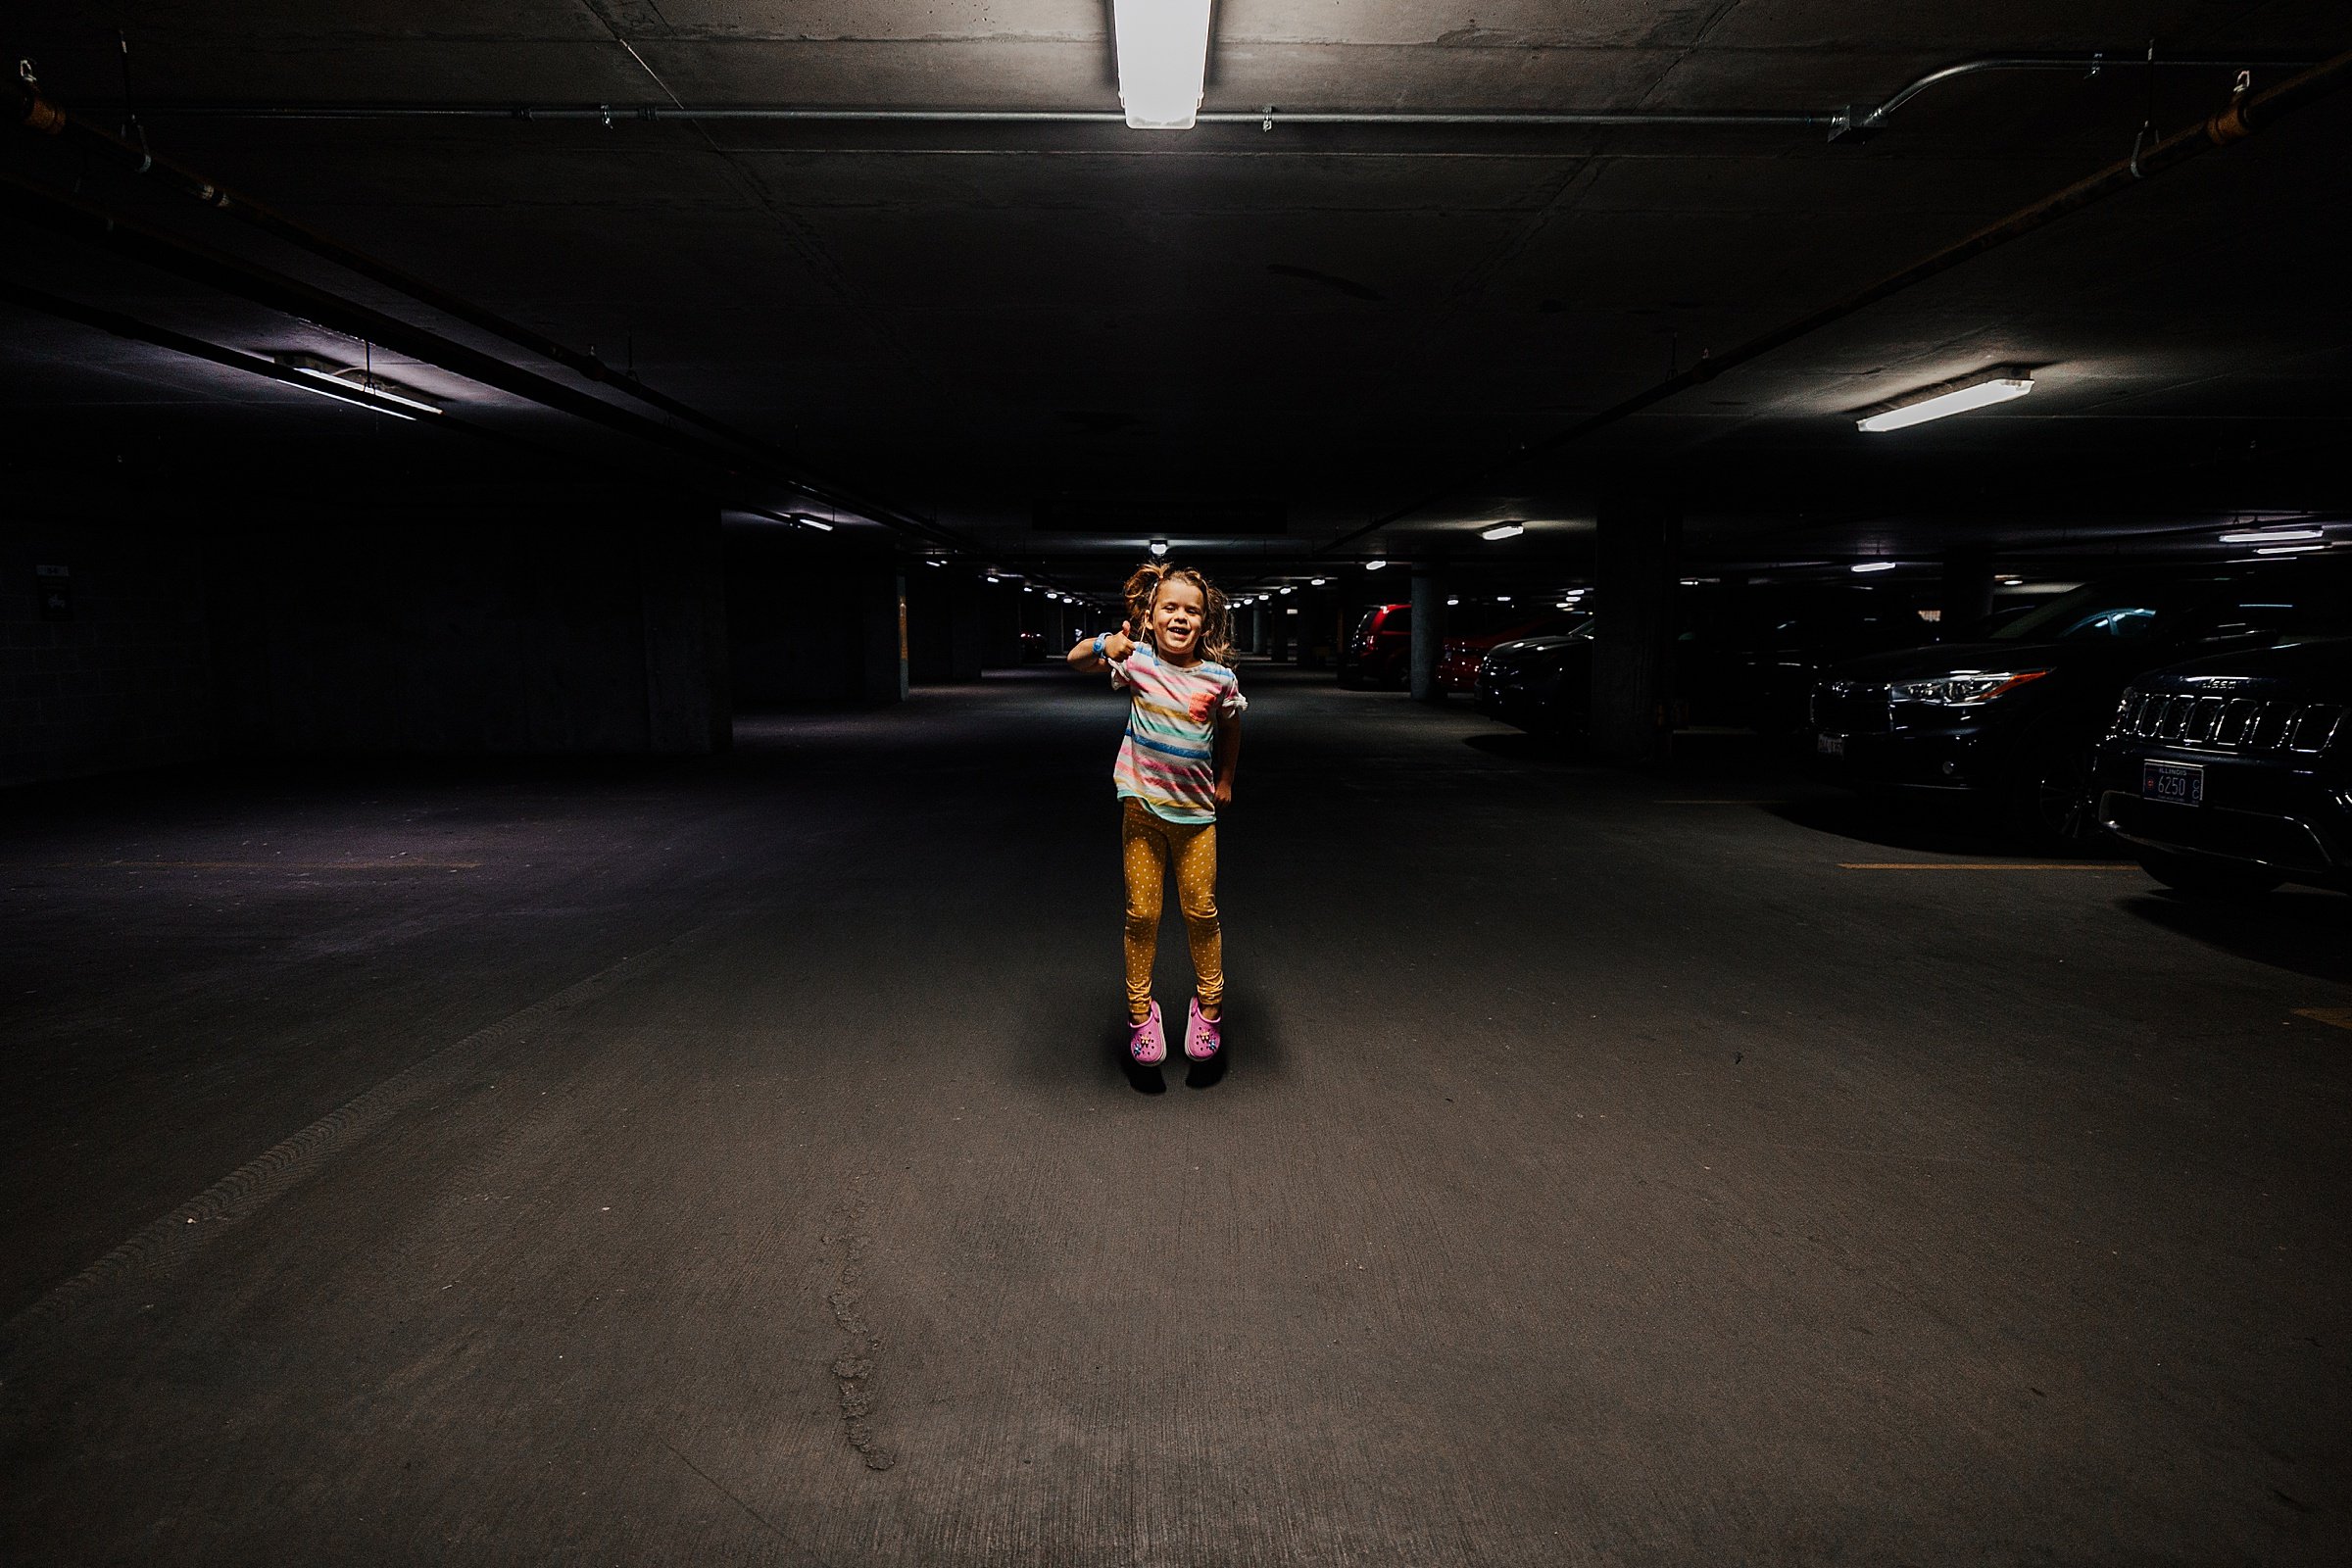  Grace loved jumping, singing and dancing in all the parking garages.  